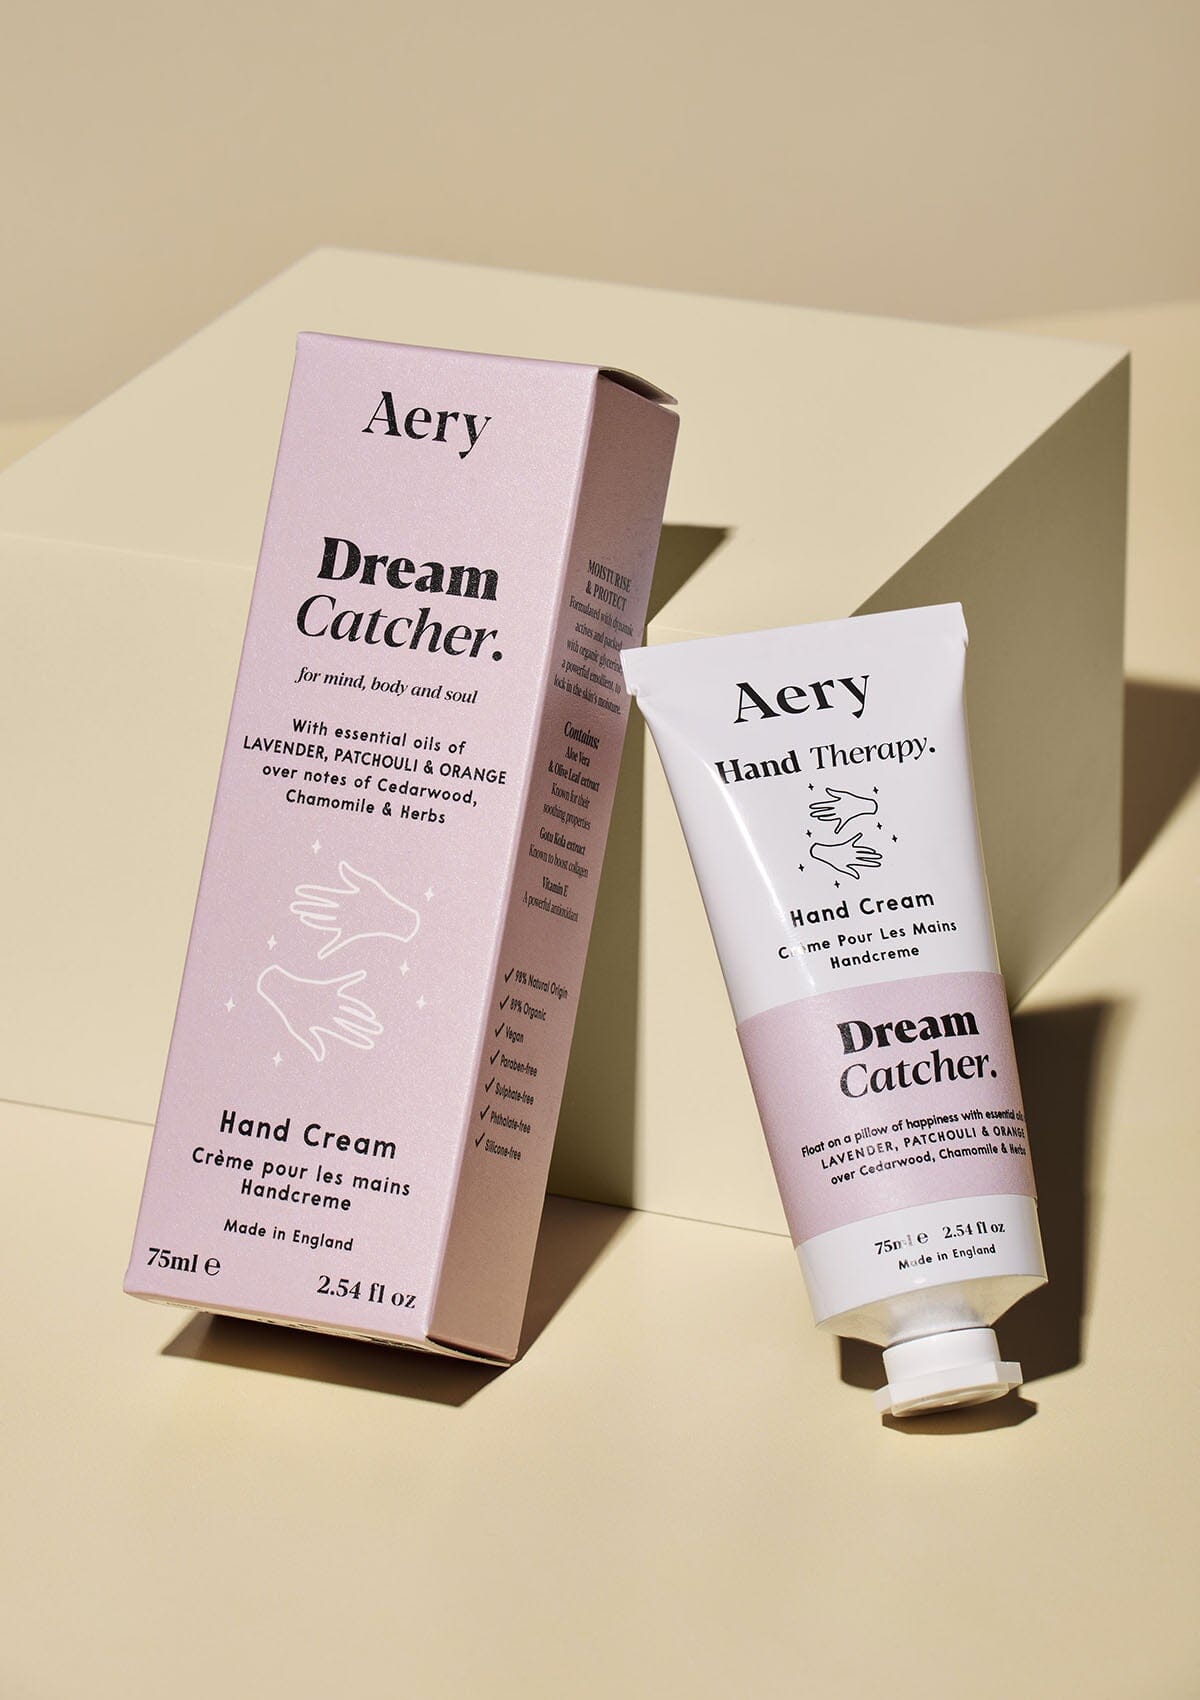 Lilac Dream Catcher hand cream displayed next to product packaging by Aery on cream background 